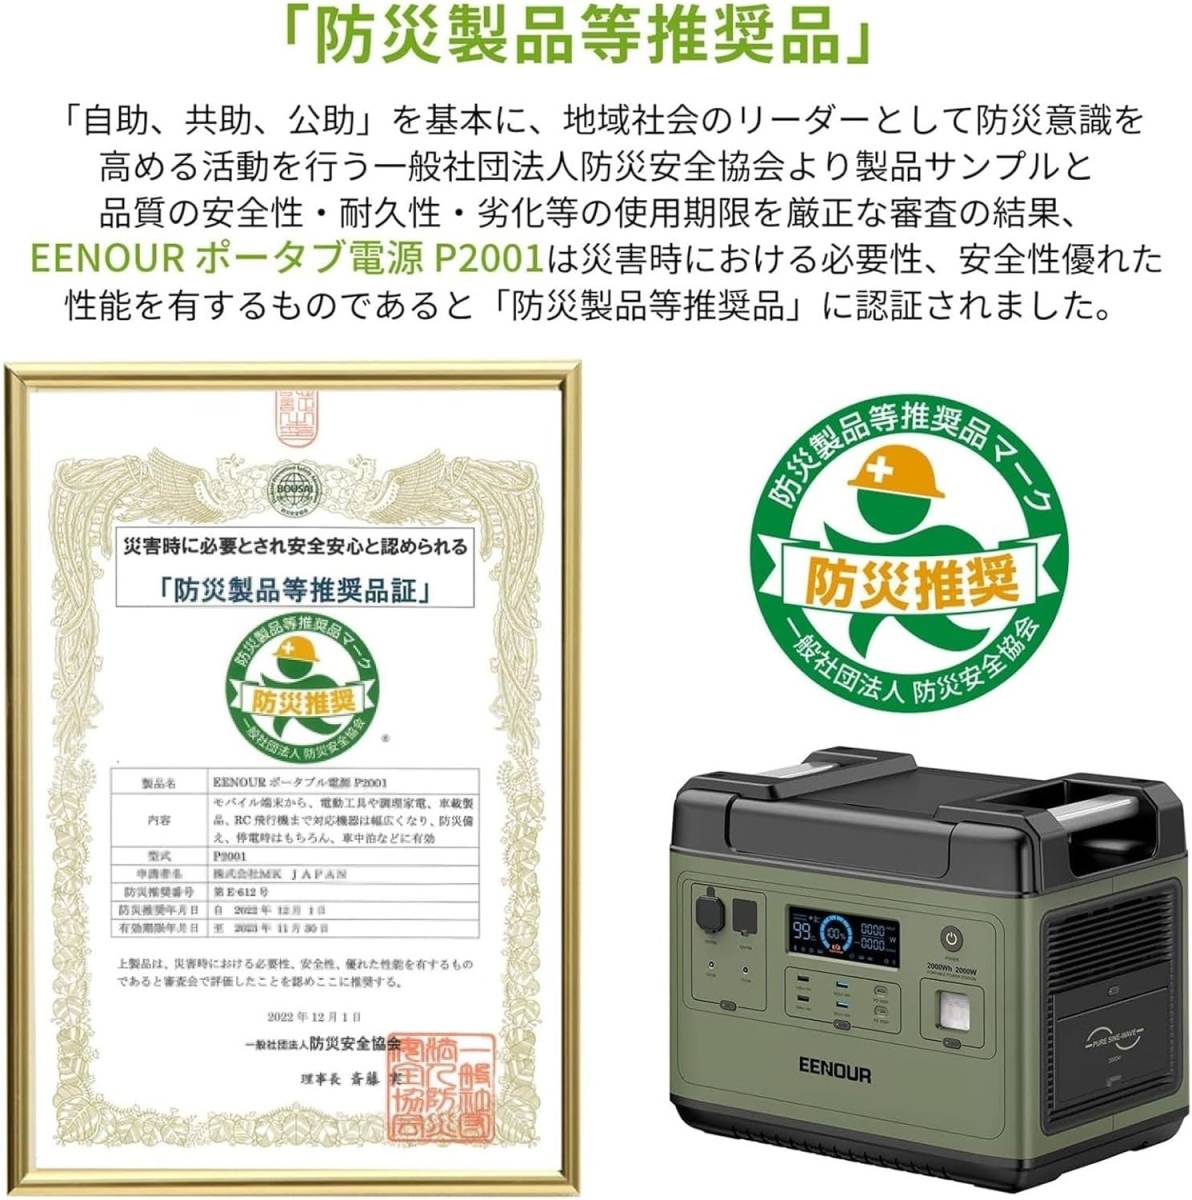  new goods EENOUR portable power supply P2001 high capacity 2000Wh/625600mAh Lynn acid iron lithium battery adoption Uninterruptible Power Supply (UPS) installing 1.5 hour full charge AC2000W